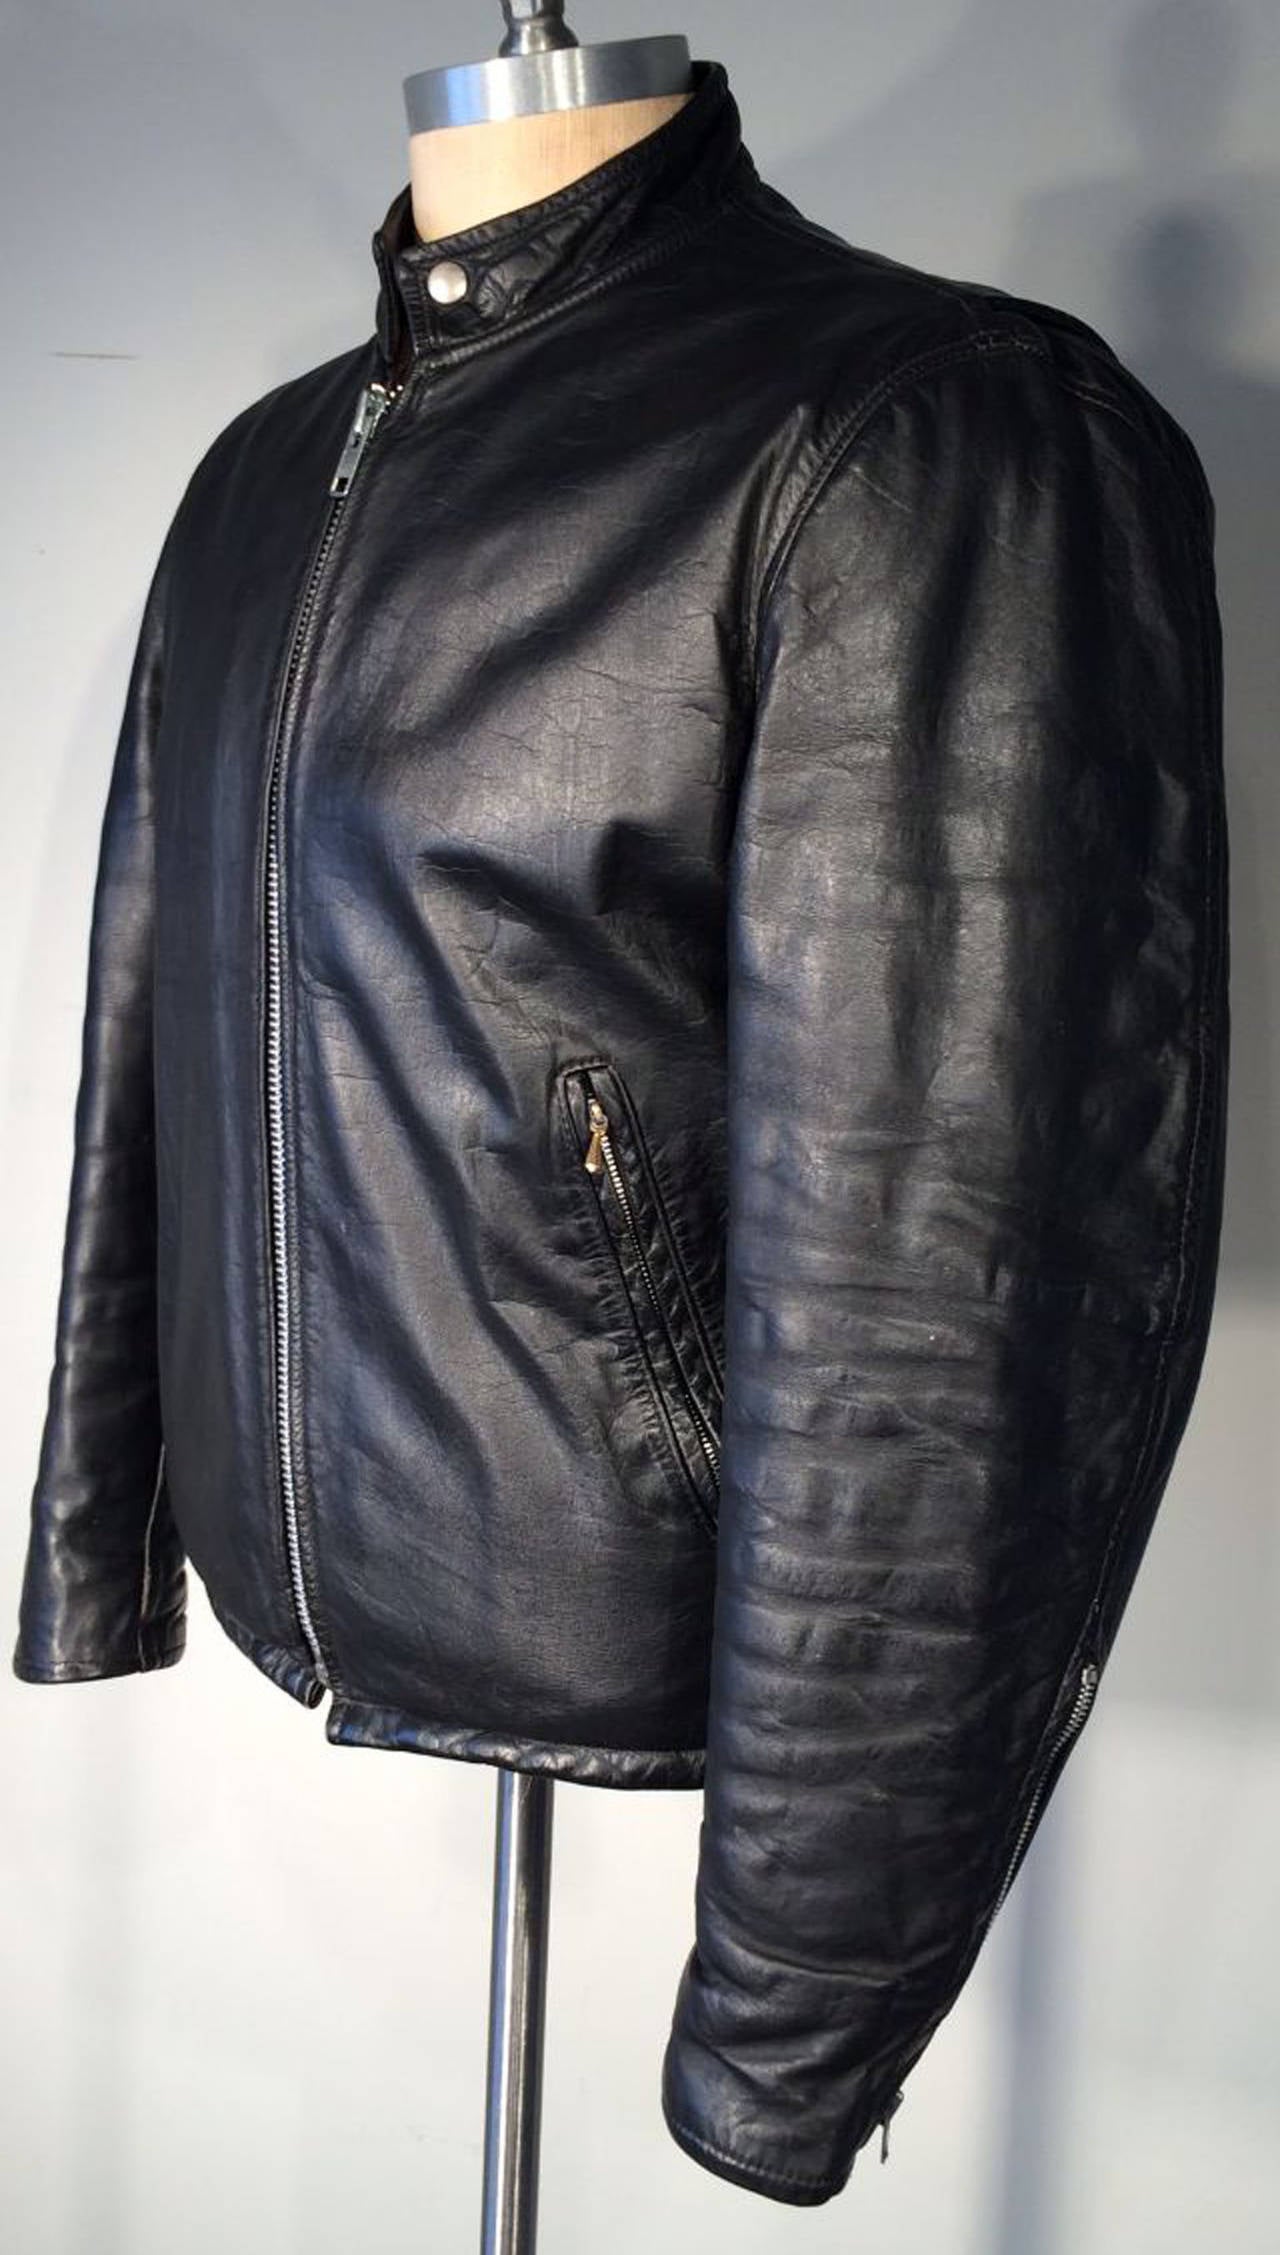 A fine gents vintage black leather cafe racer/motorcycle jacket. Top grade black leather item fully lined with zipper and snap tab collar closures. Excellent.